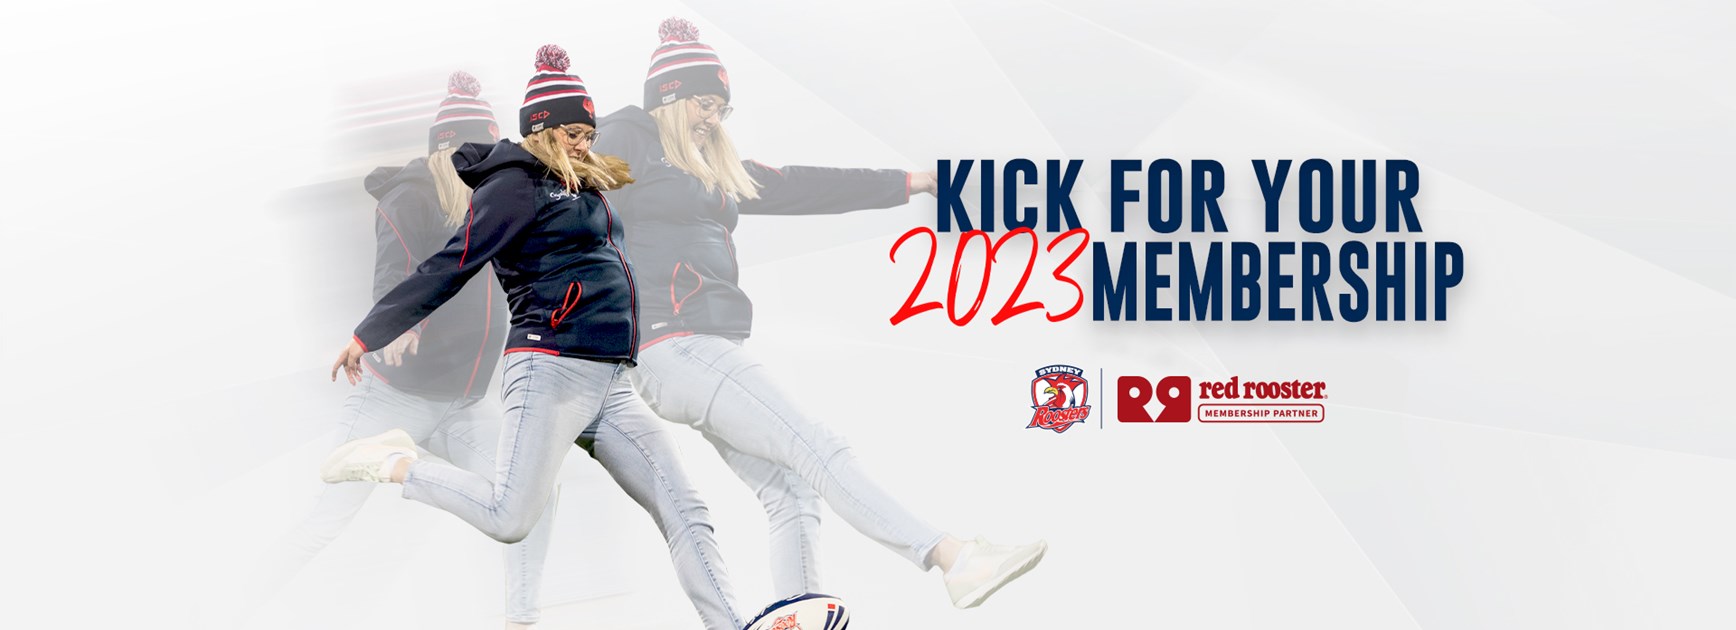 Kick For Your Membership at Allianz Stadium in Round 25!